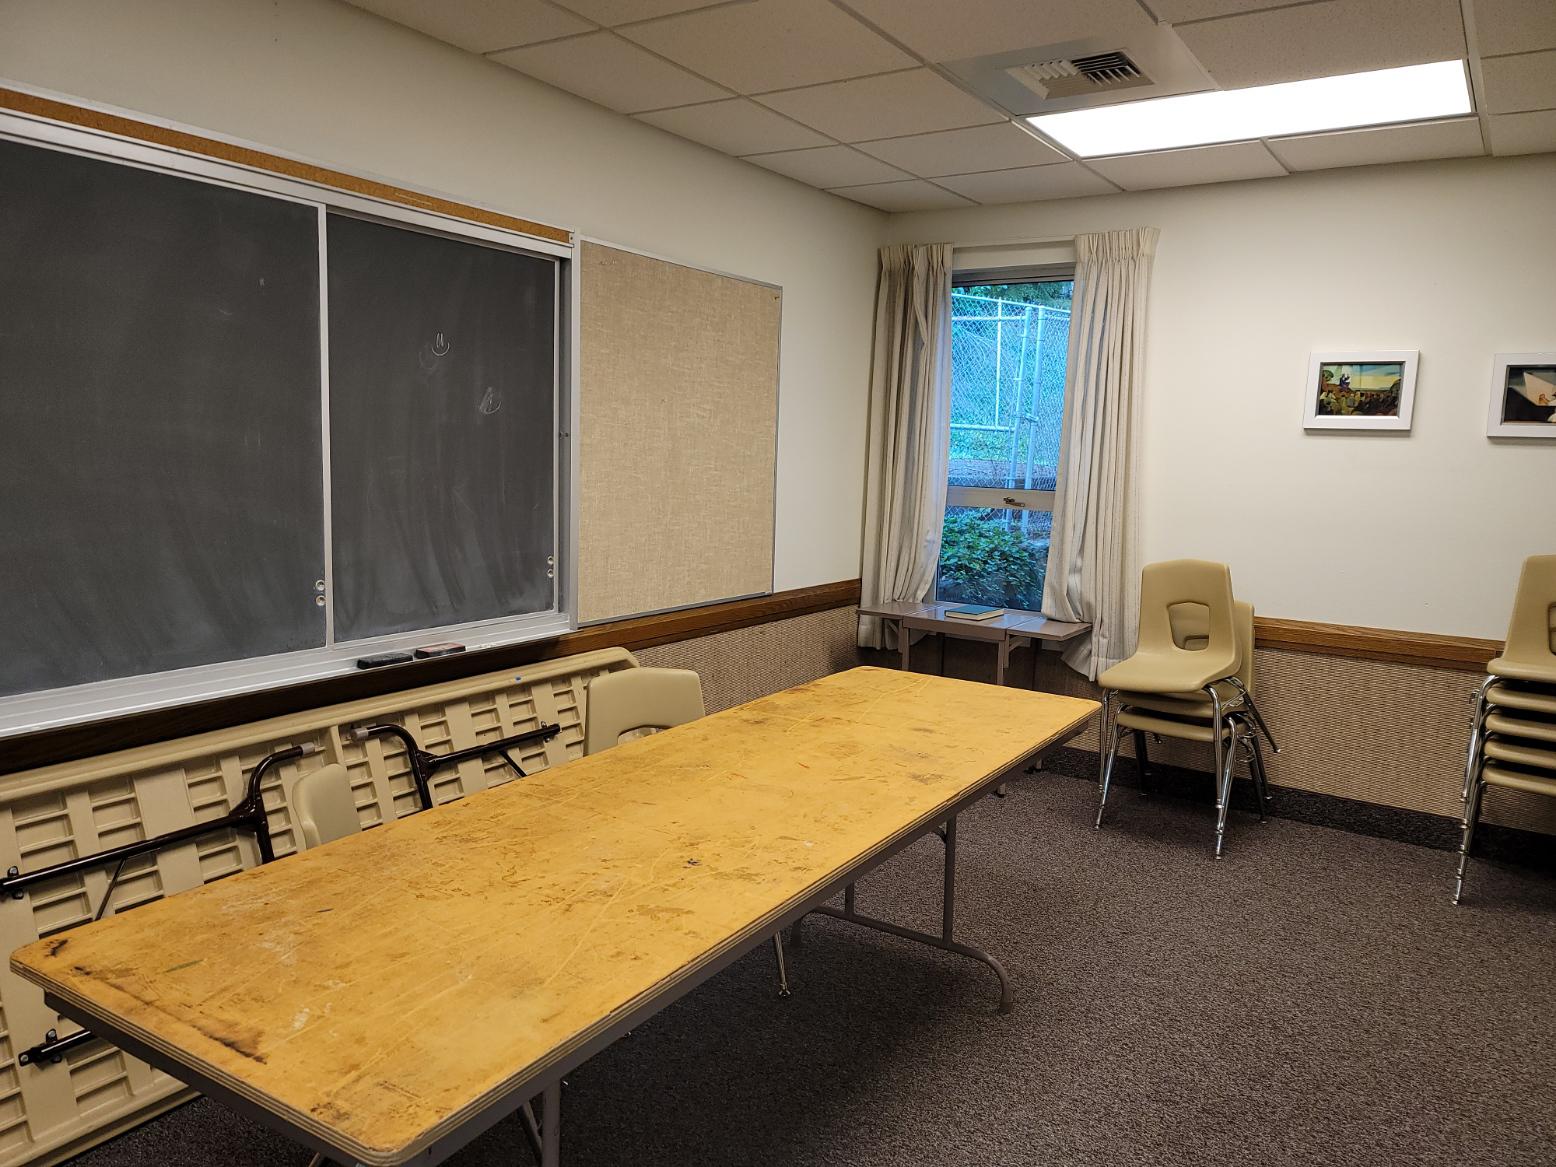 Classroom in The Church of Jesus Christ of Latter-day Saints